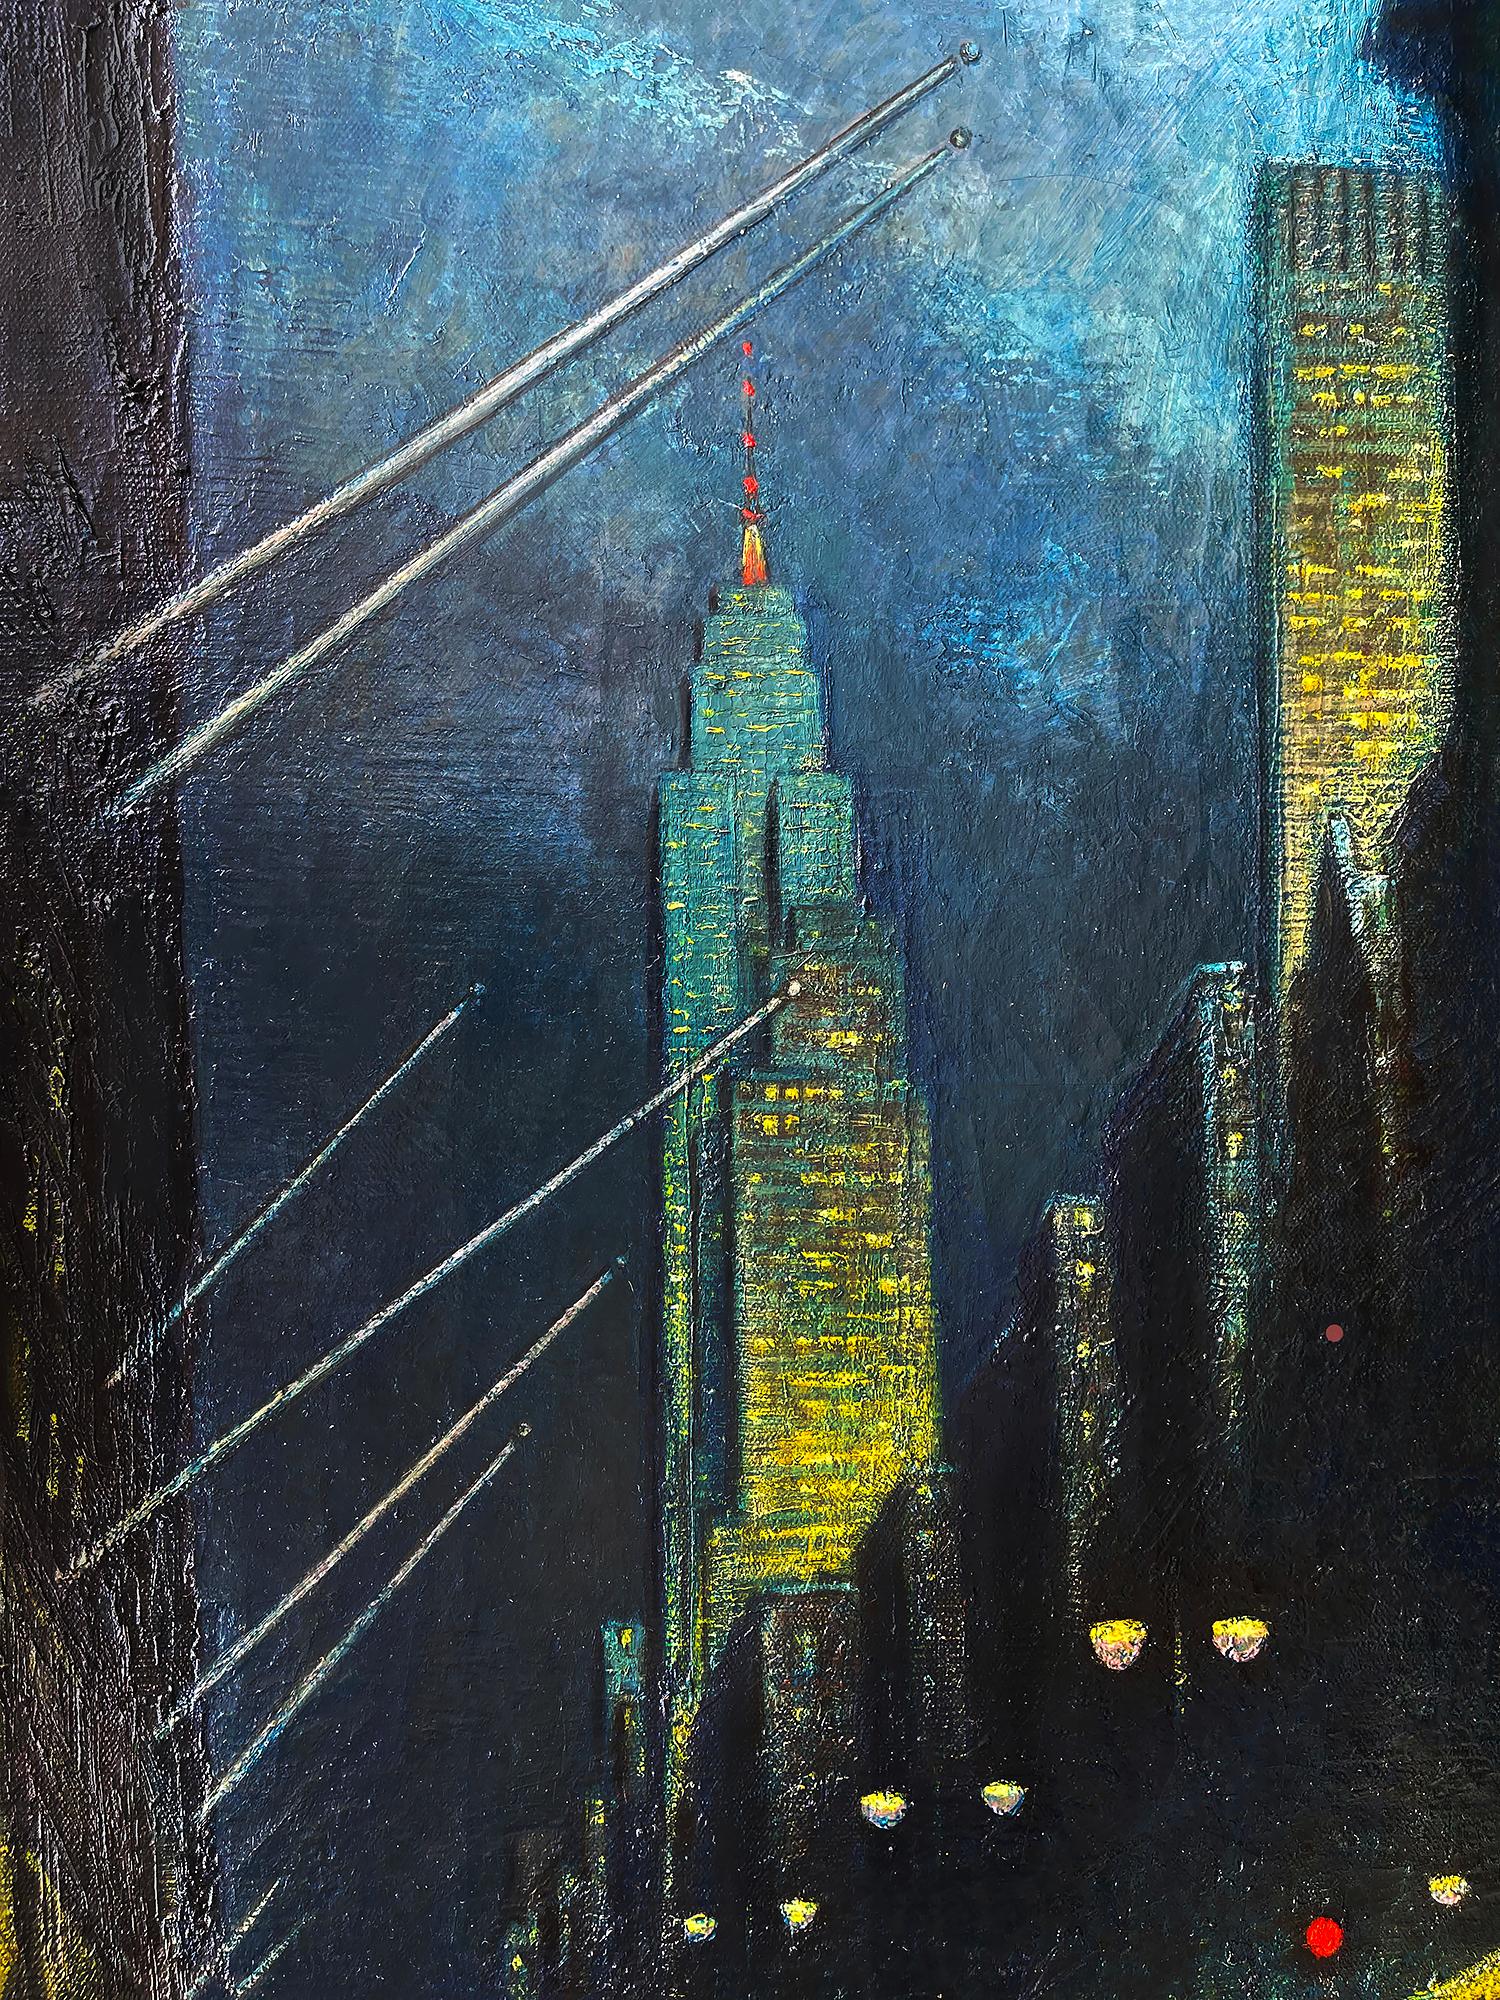 Winter Evening Fifth Avenue - New York at Night - Mid-Century. - Post-Impressionist Painting by Ernest Fiene